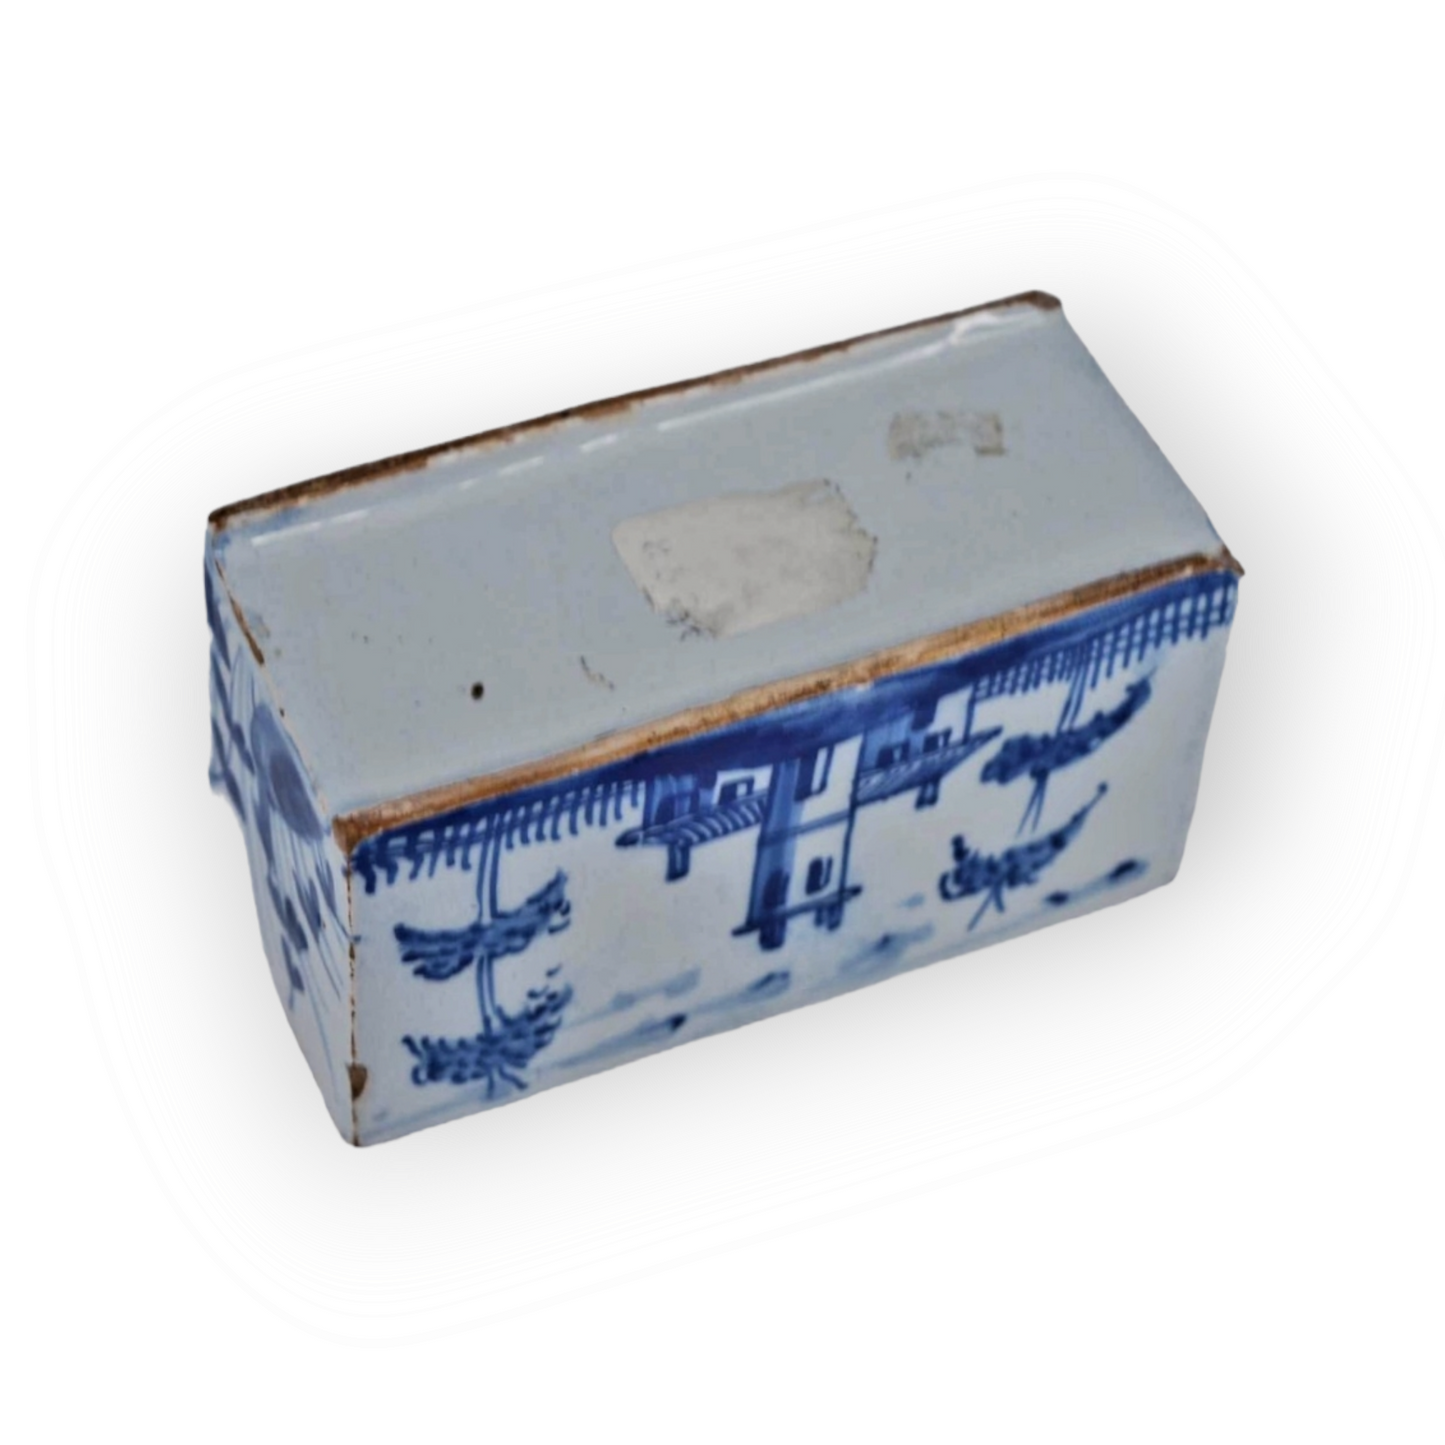 Mid 18thC English Antique Blue & White Delftware Flower Brick, Attributed to Liverpool, Circa 1760